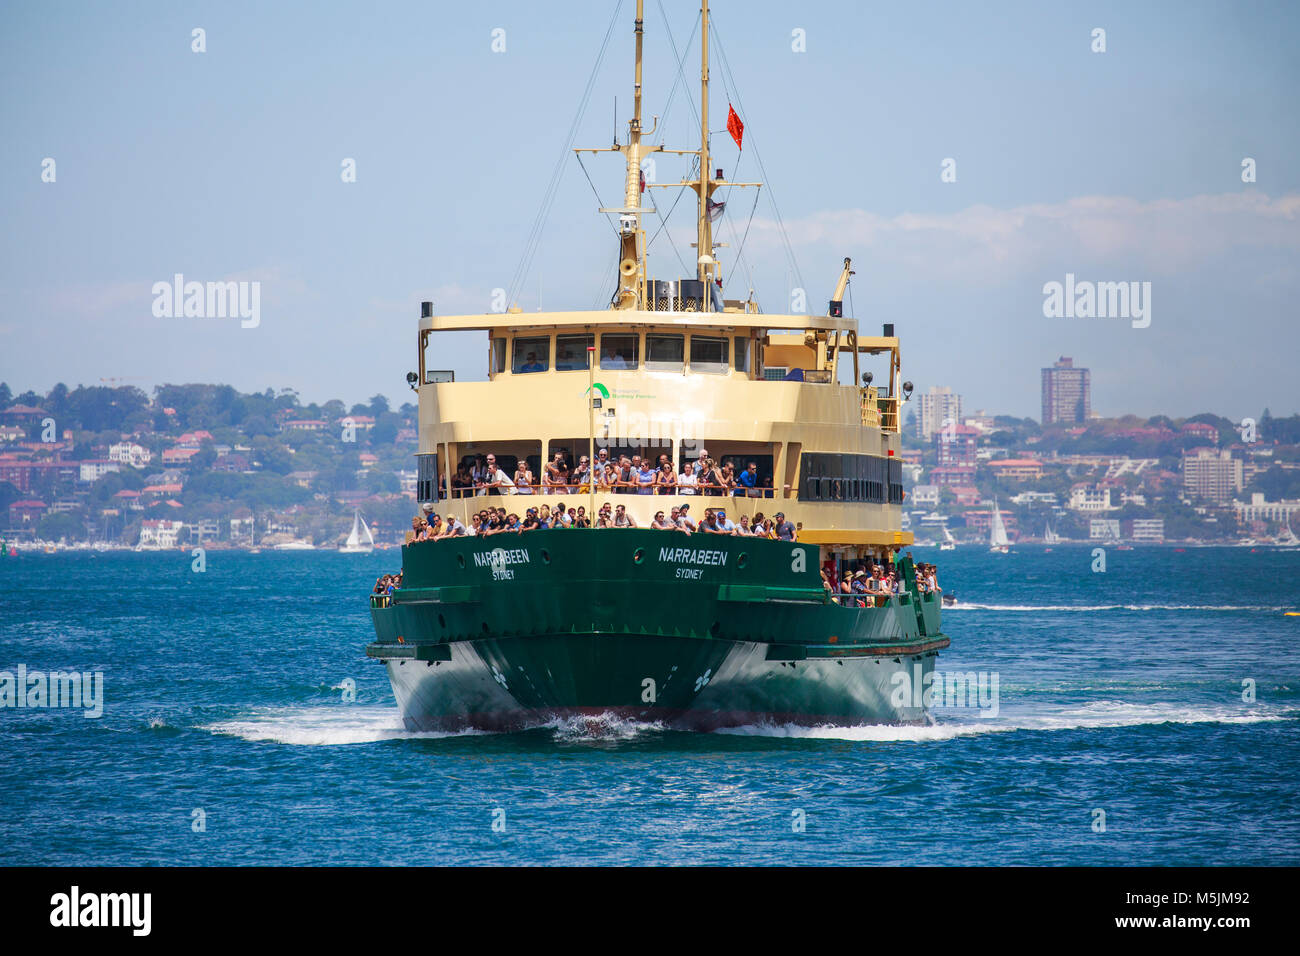 Sydney ferry Narrabeen, freshwater class ferry, approaching Manly Wharf in Sydney,Australia Stock Photo